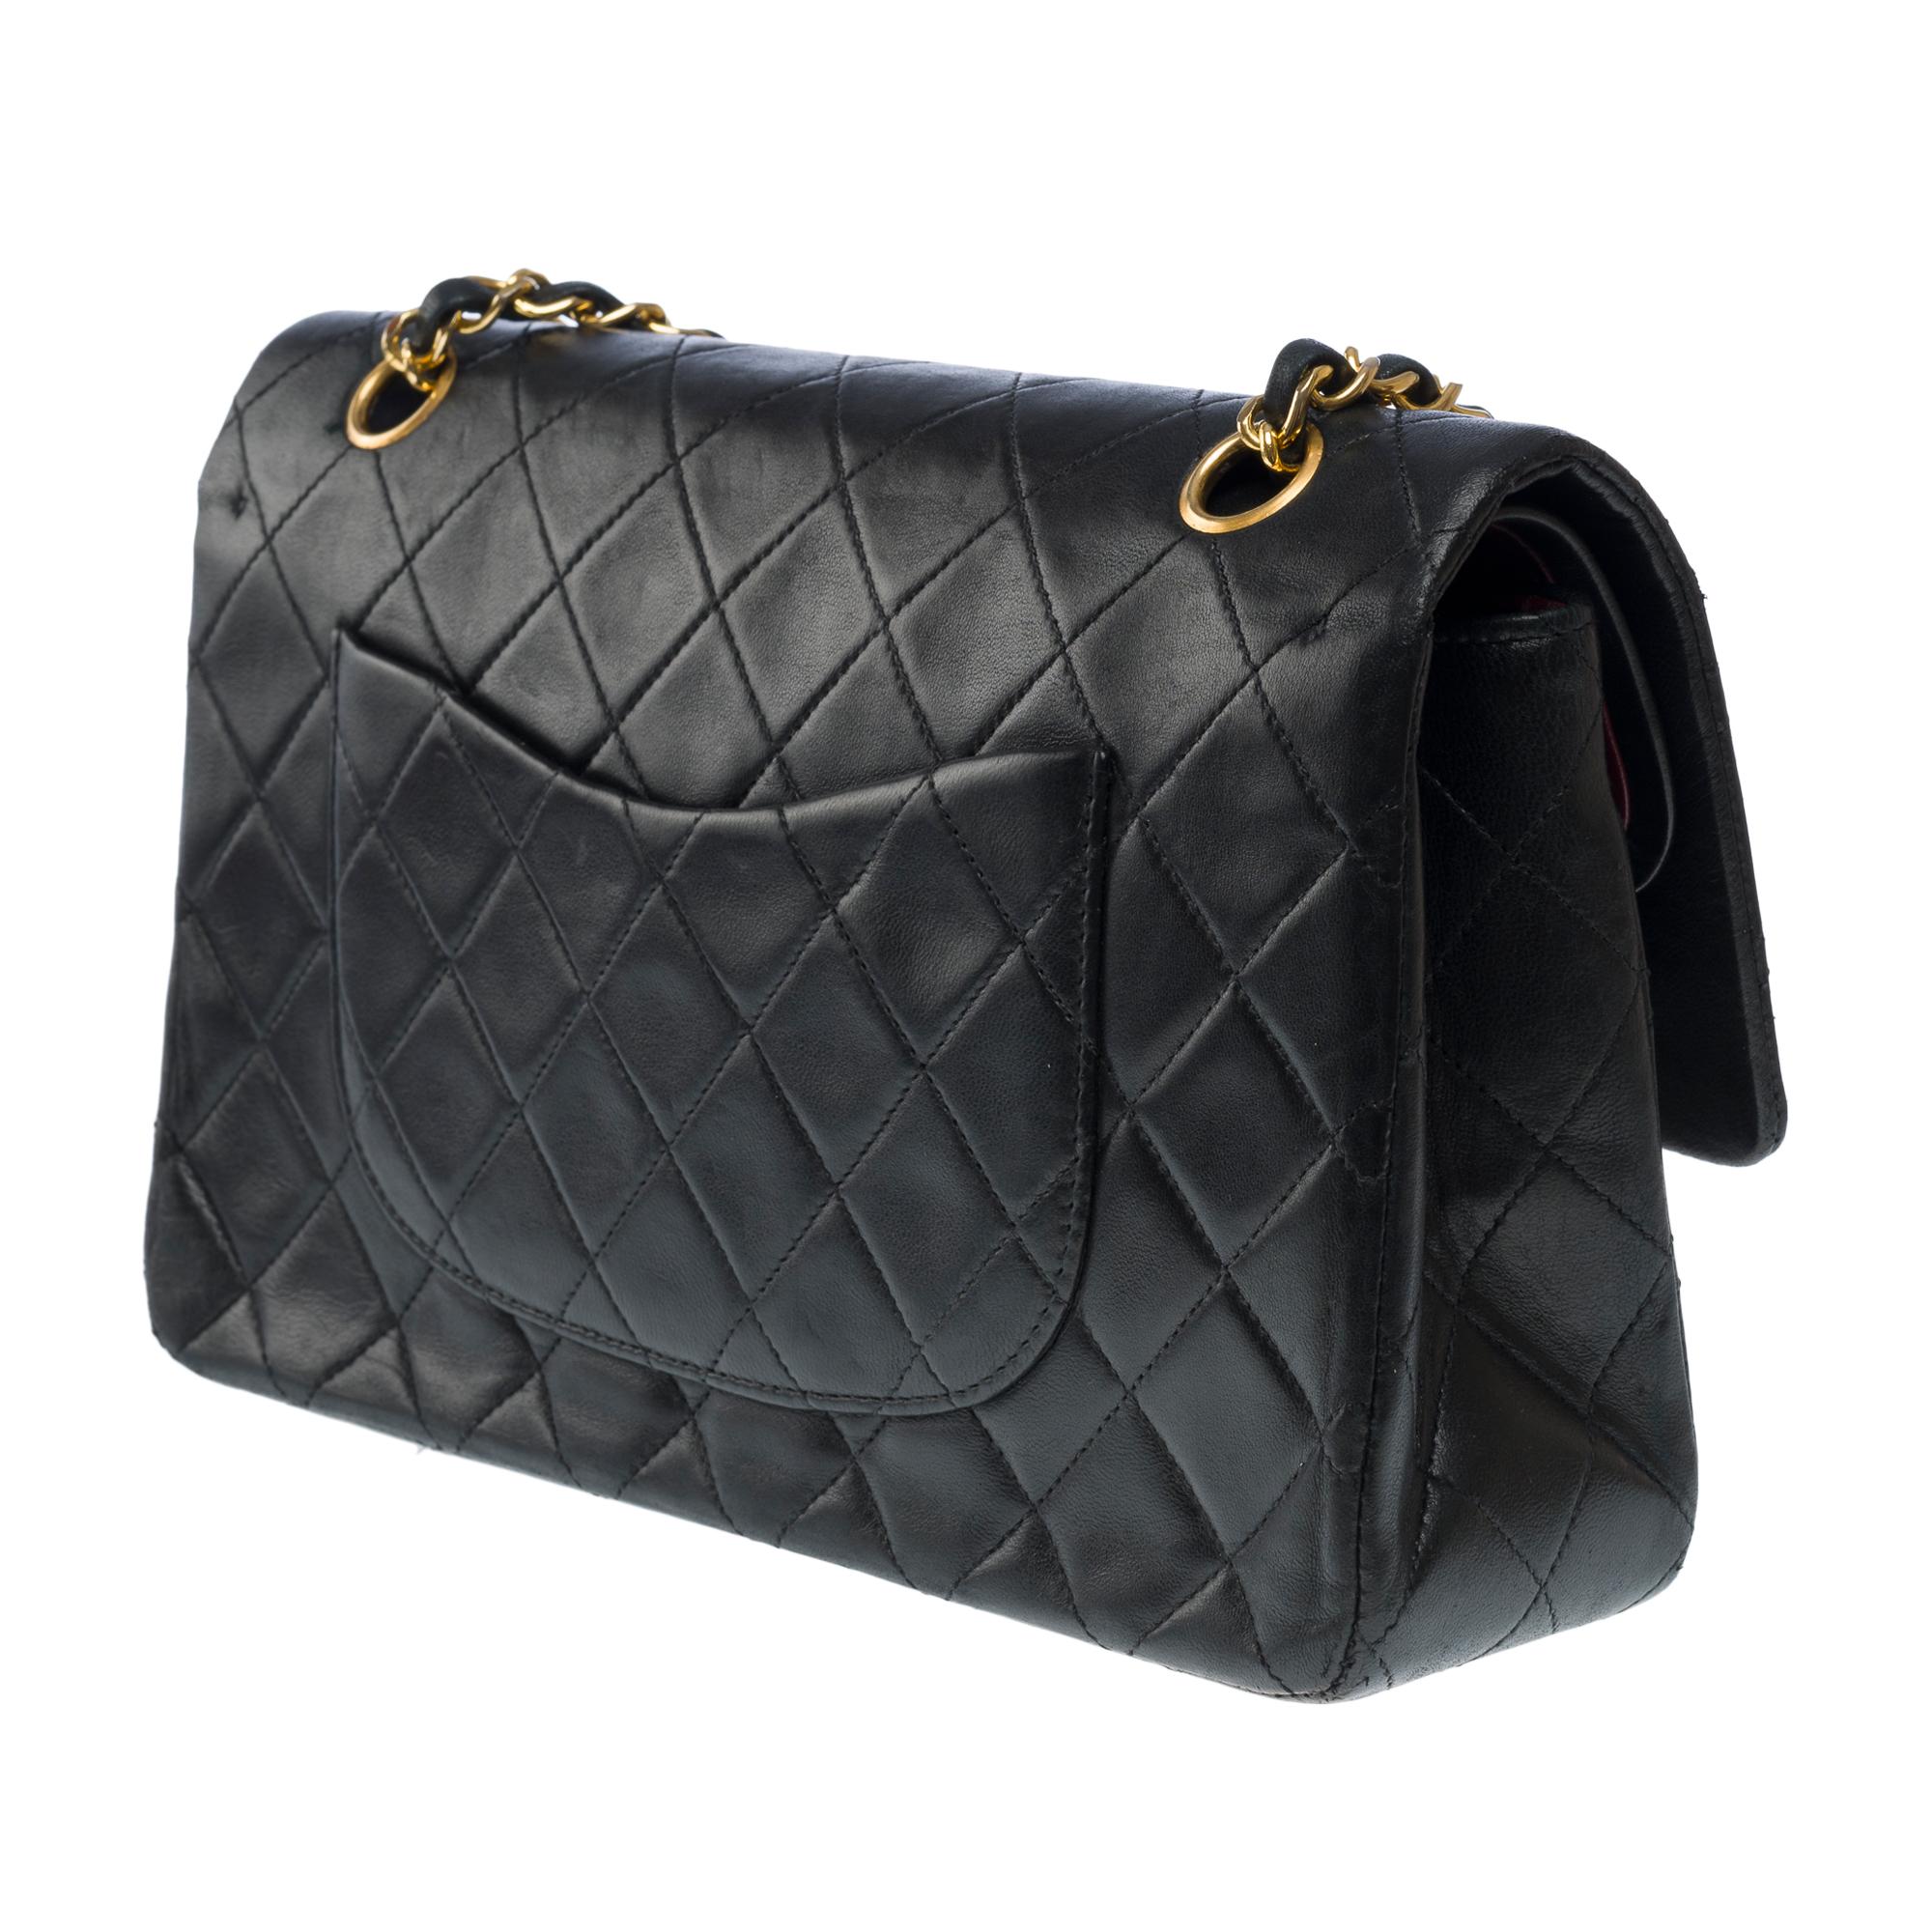 Chanel Timeless double flap shoulder bag in black quilted lambskin leather, GHW For Sale 2